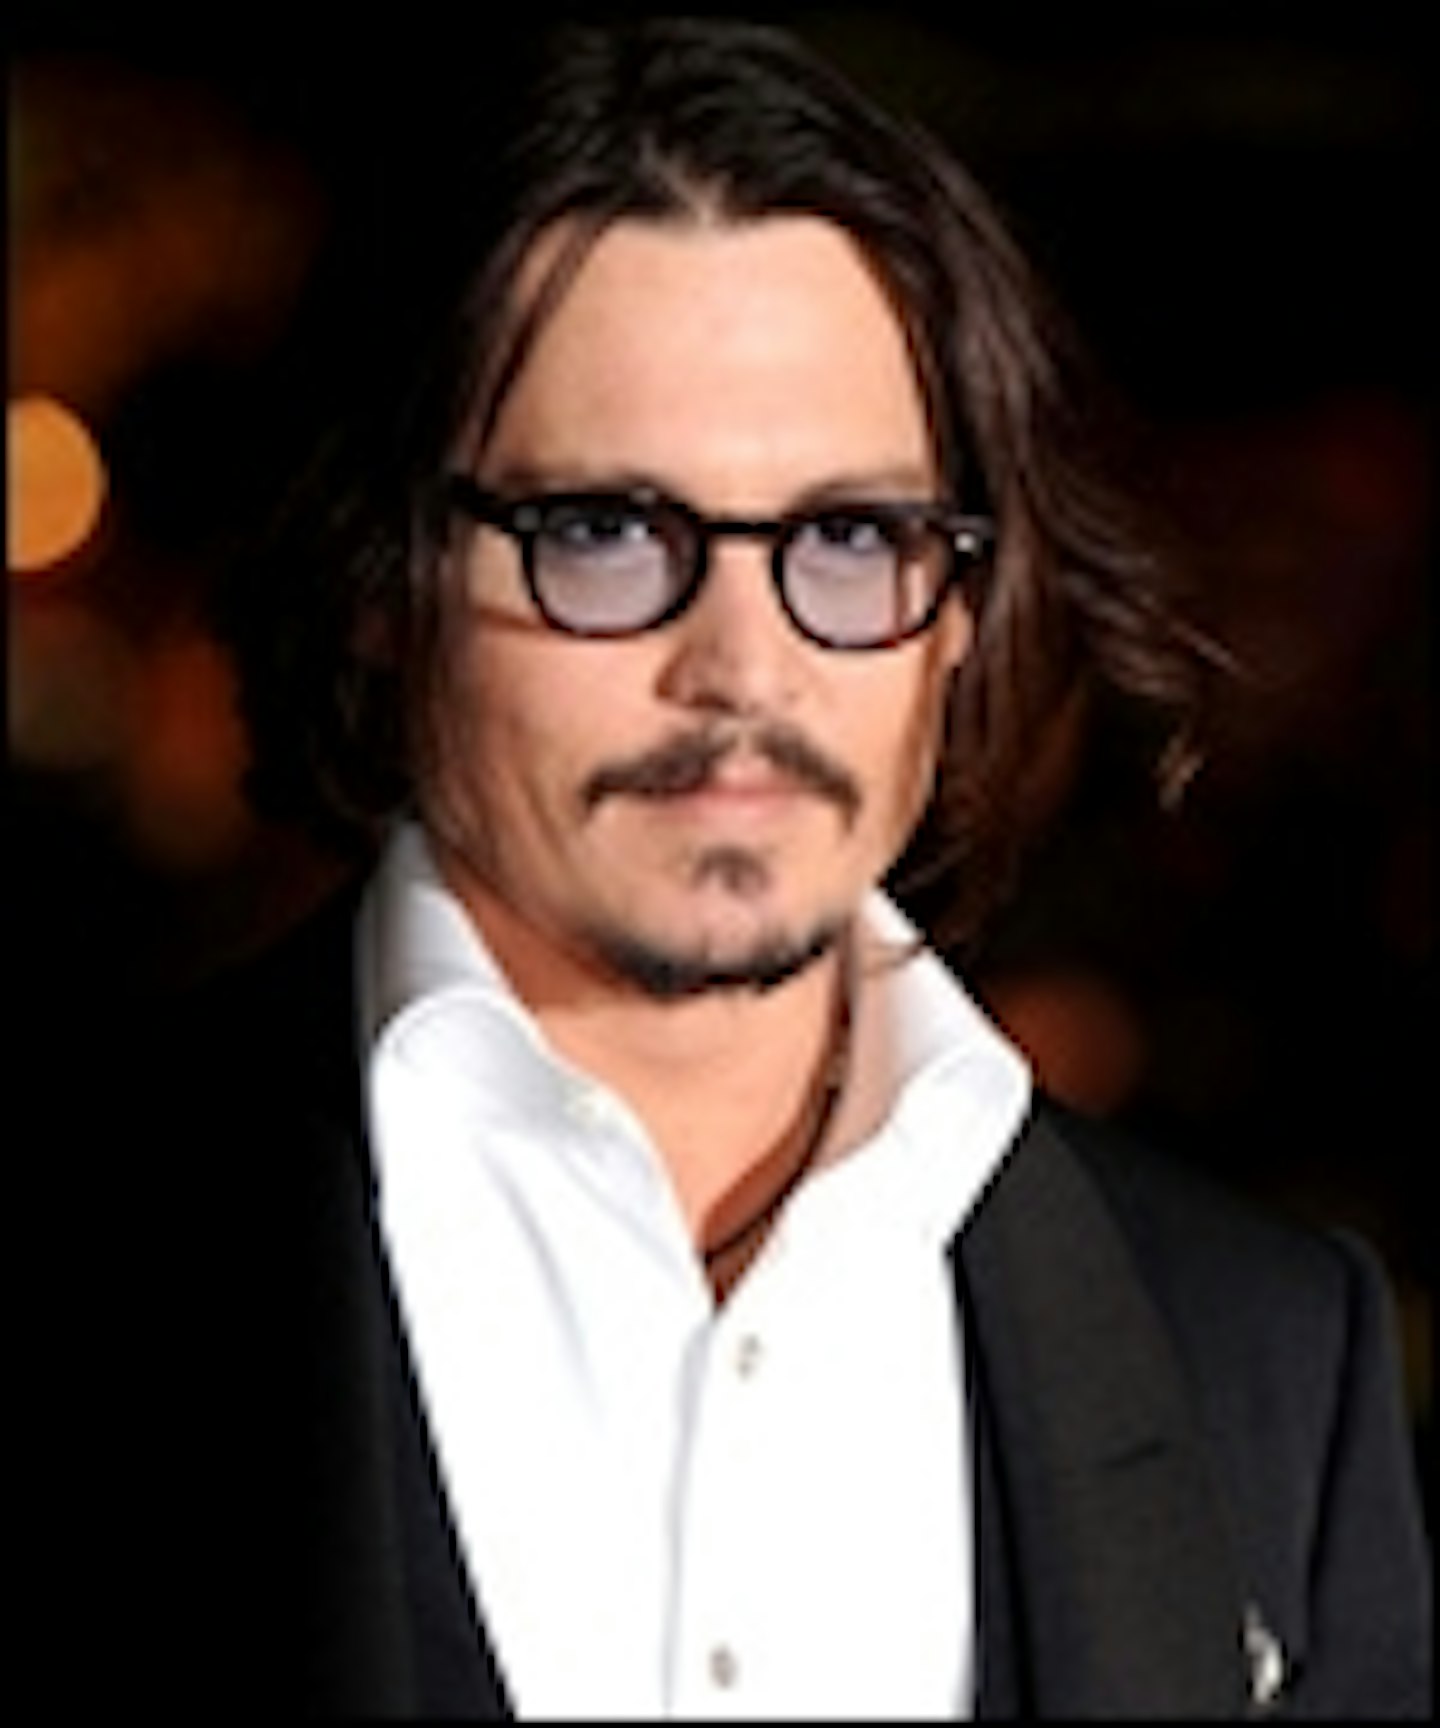 Now Johnny Depp Looks At Sleeping Dogs